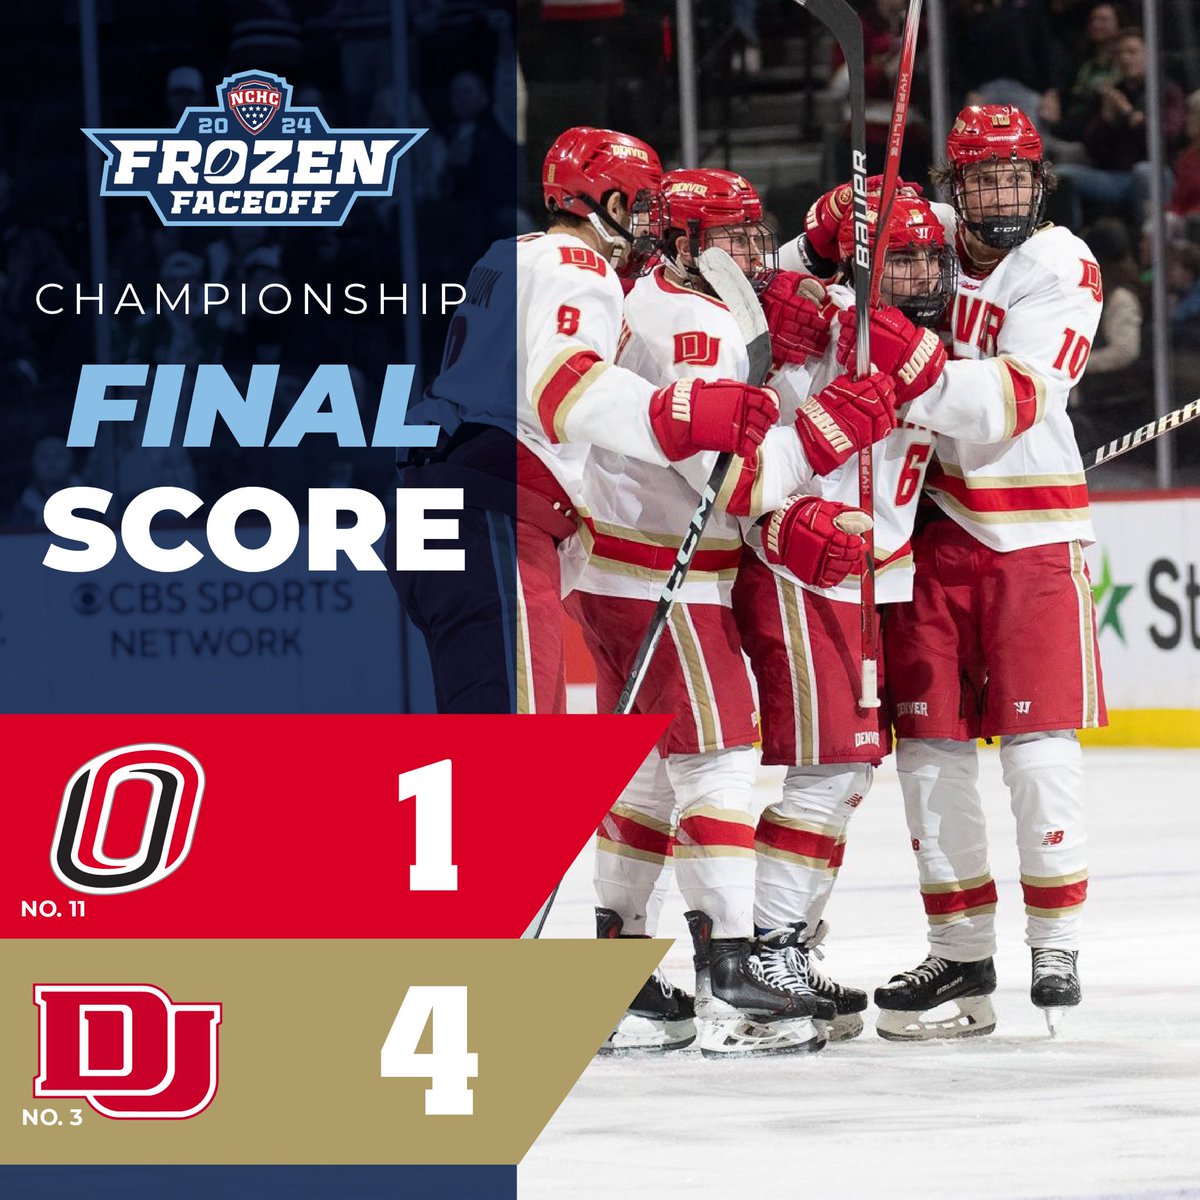 DU downs Omaha for its first #FrozenFaceoff title since 2018! #NCHChockey // #GoPios